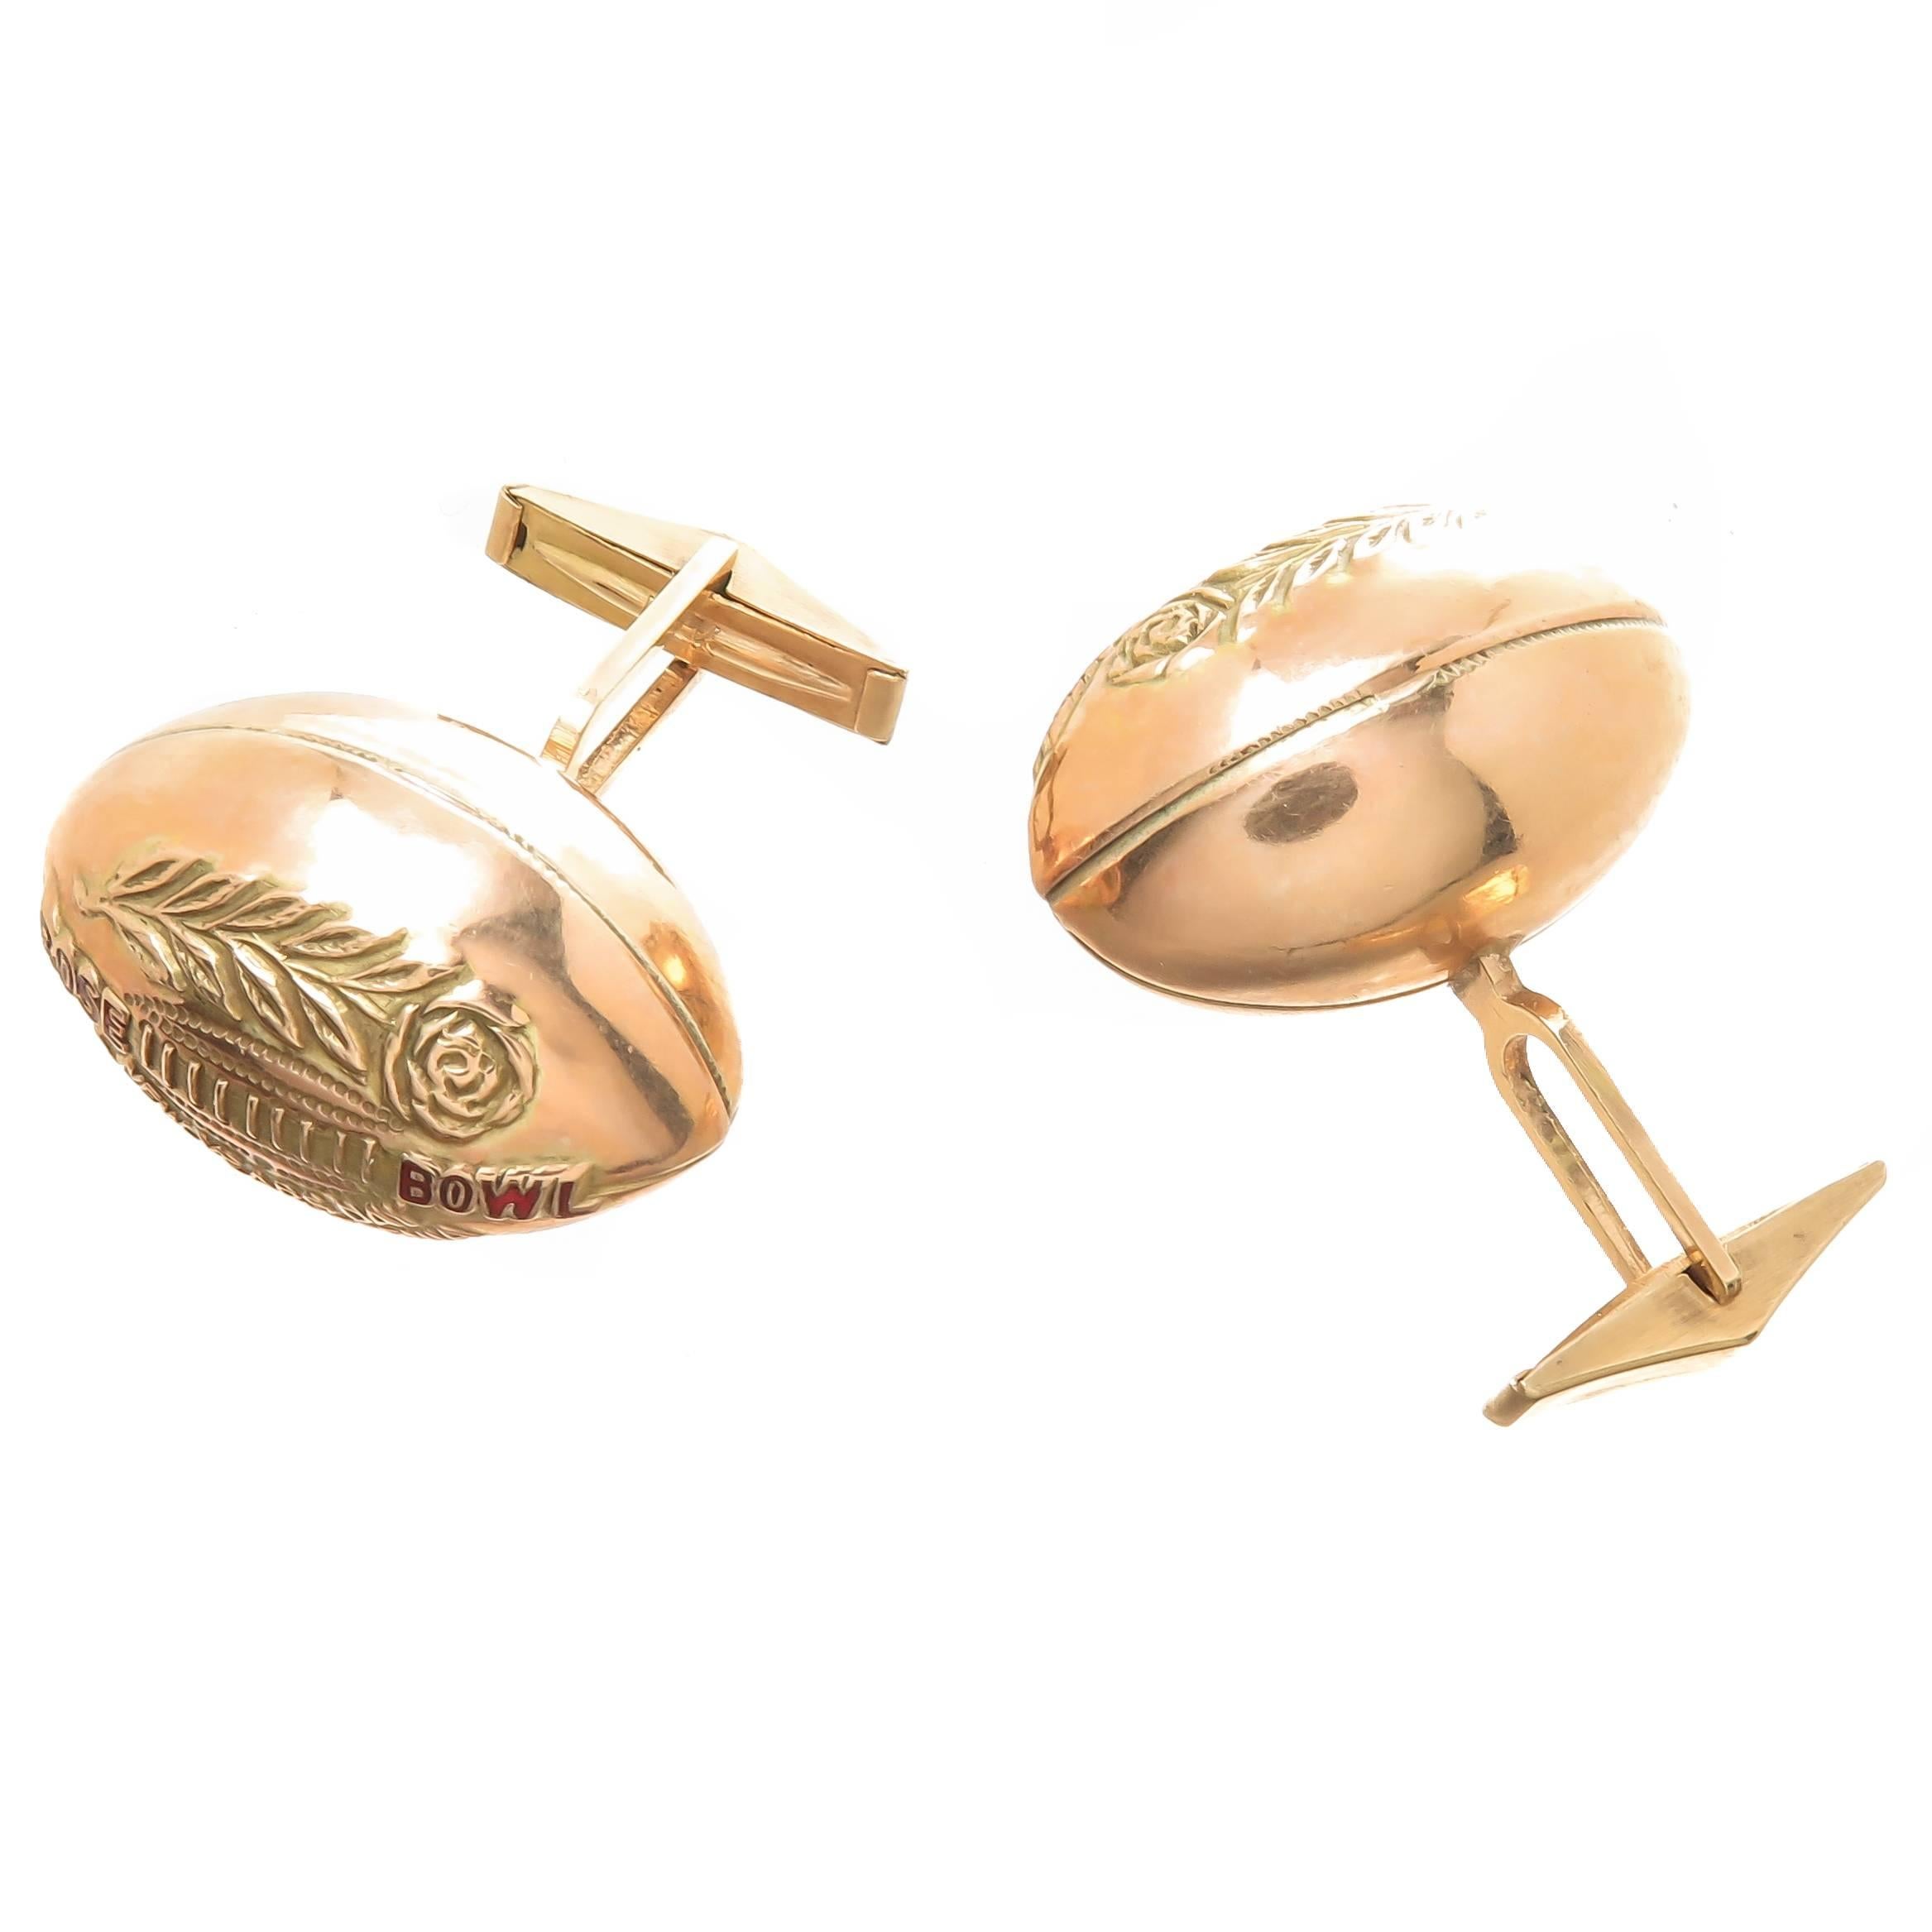 Circa 1960 14K Yellow Gold Rose Bowl Presentation Cufflinks. Football Shaped with Raised embossing and Red Enamel, measuring 1 1/8 inch in length and weighing 21 Grams. These were most likely made as presentation to game officials, winning team